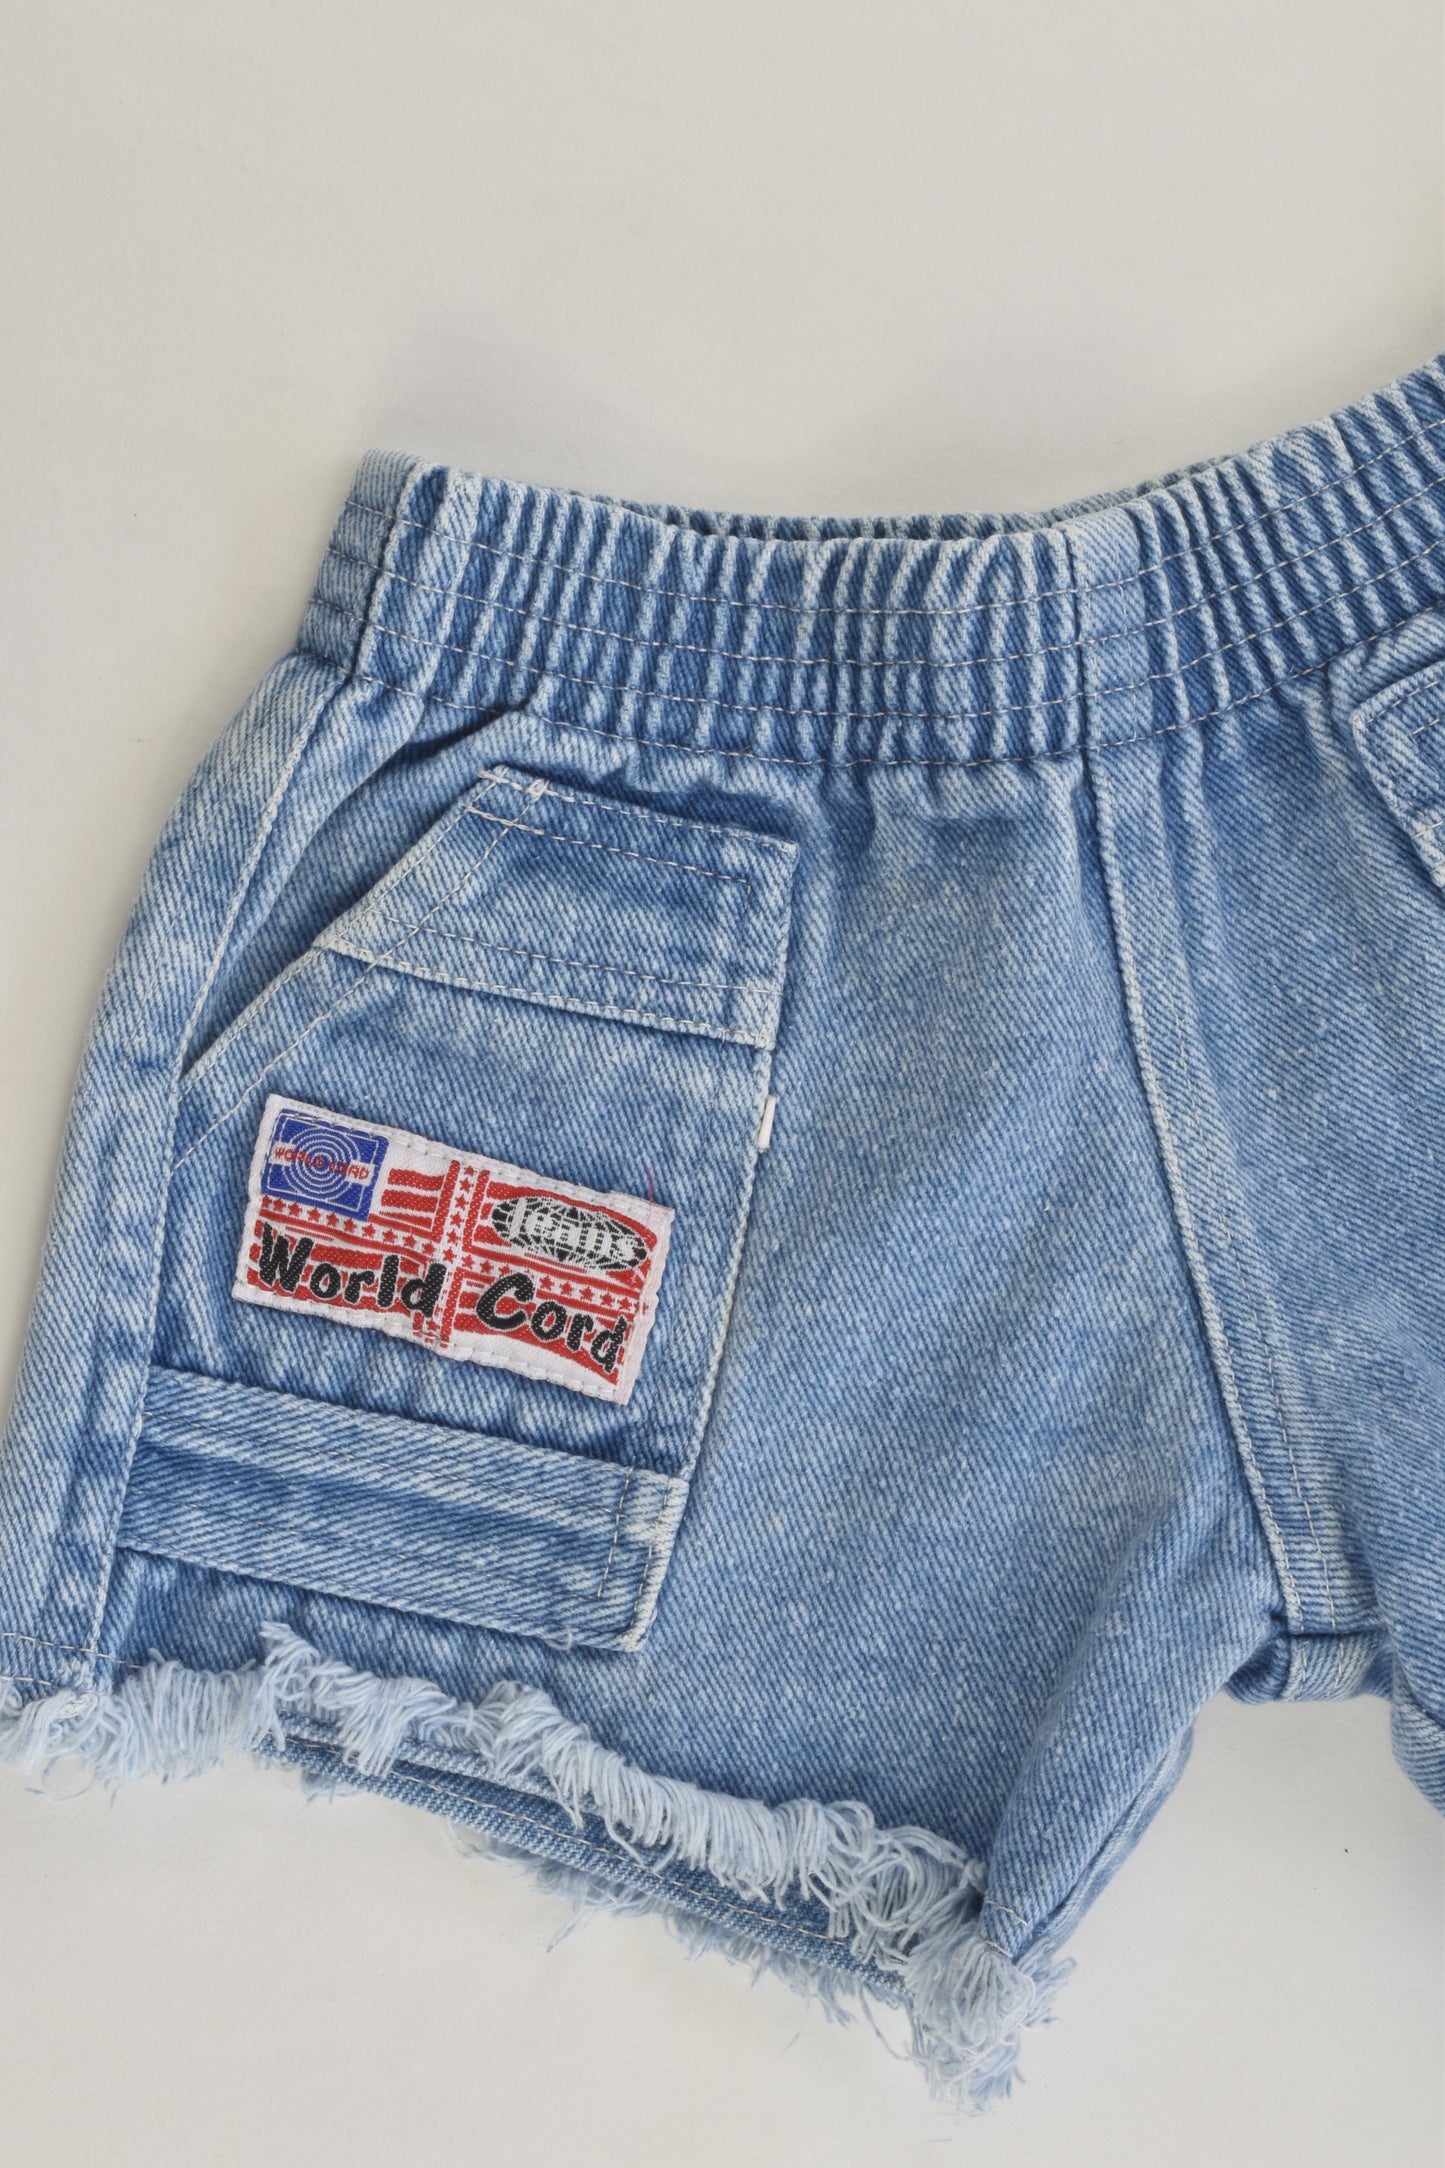 Brand Unknown Size approx 1 Vintage Style 'World Cord' Denim Shorts